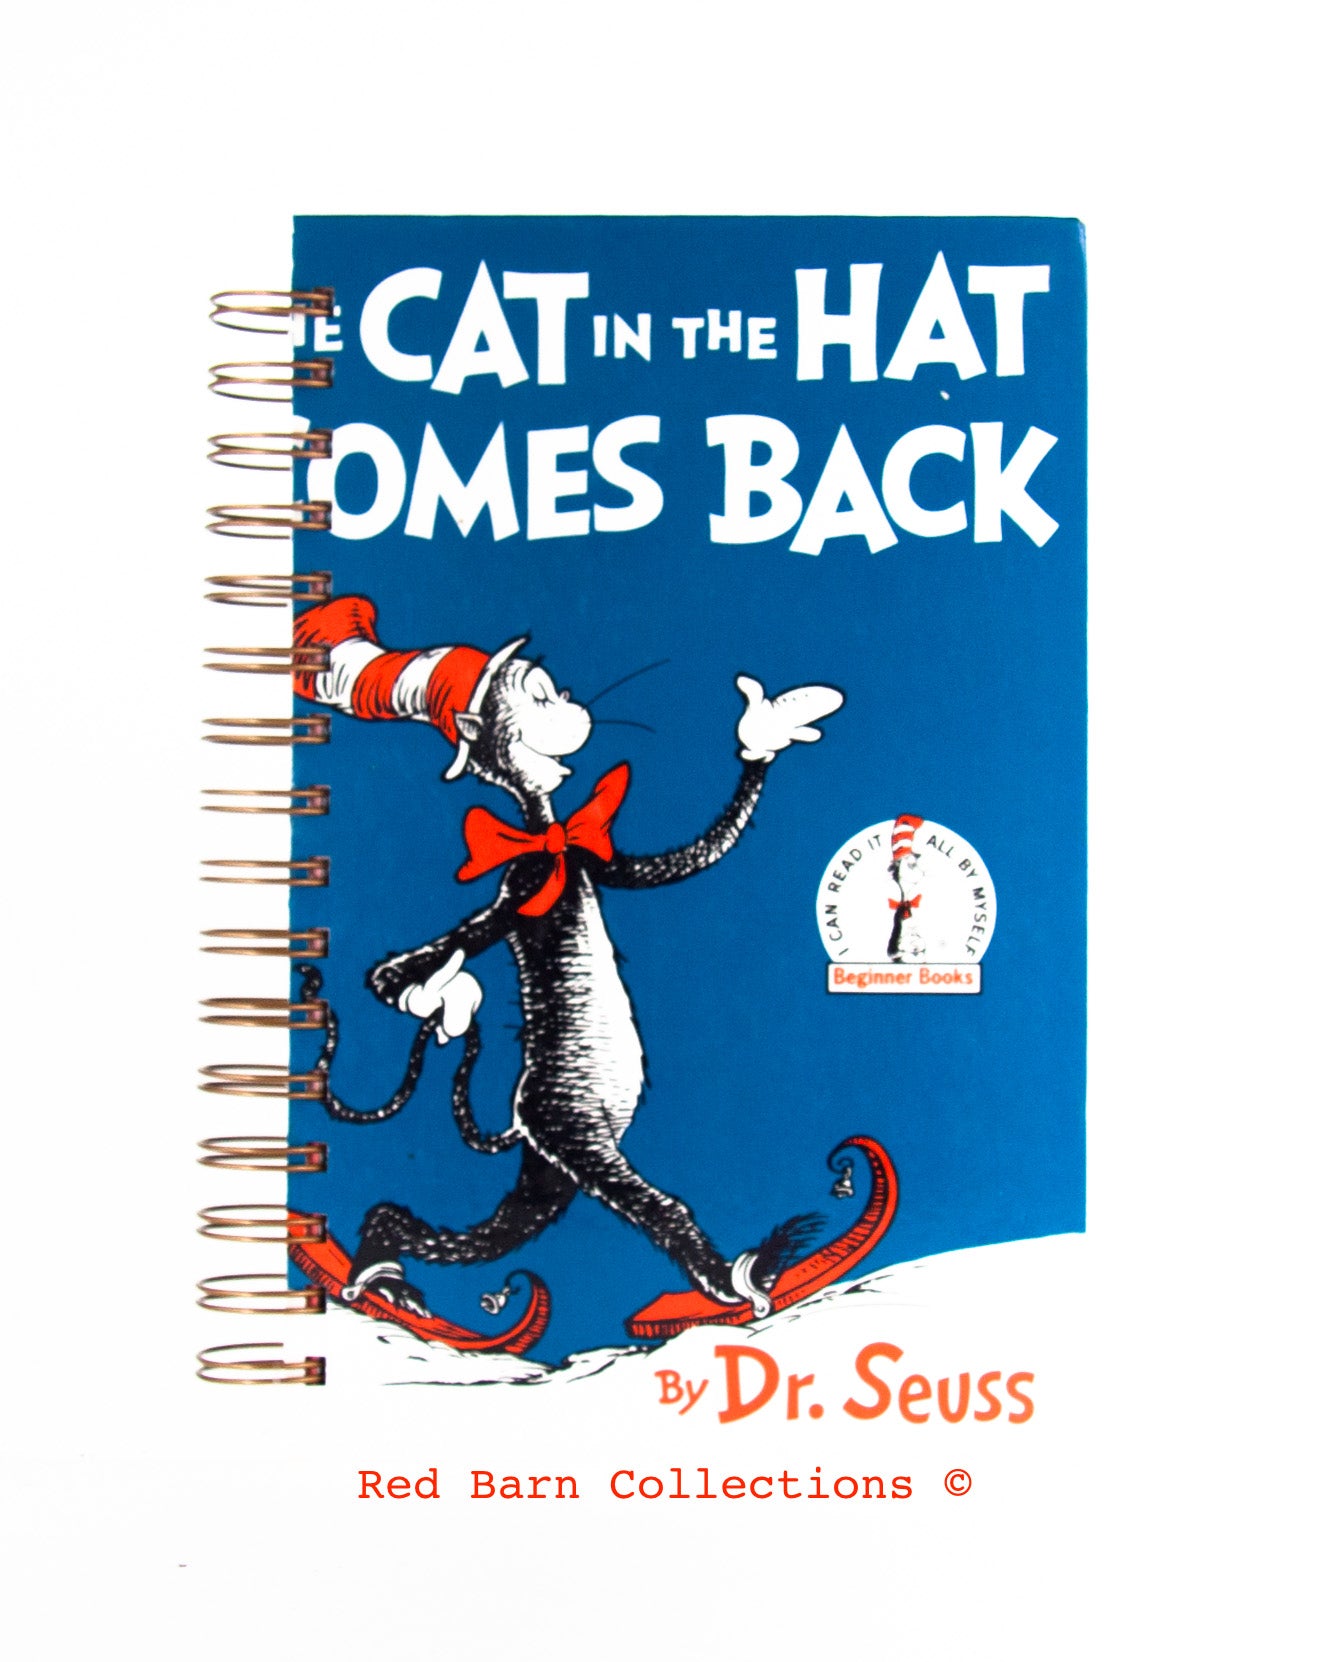 The Cat in the Hat Comes Back-Red Barn Collections